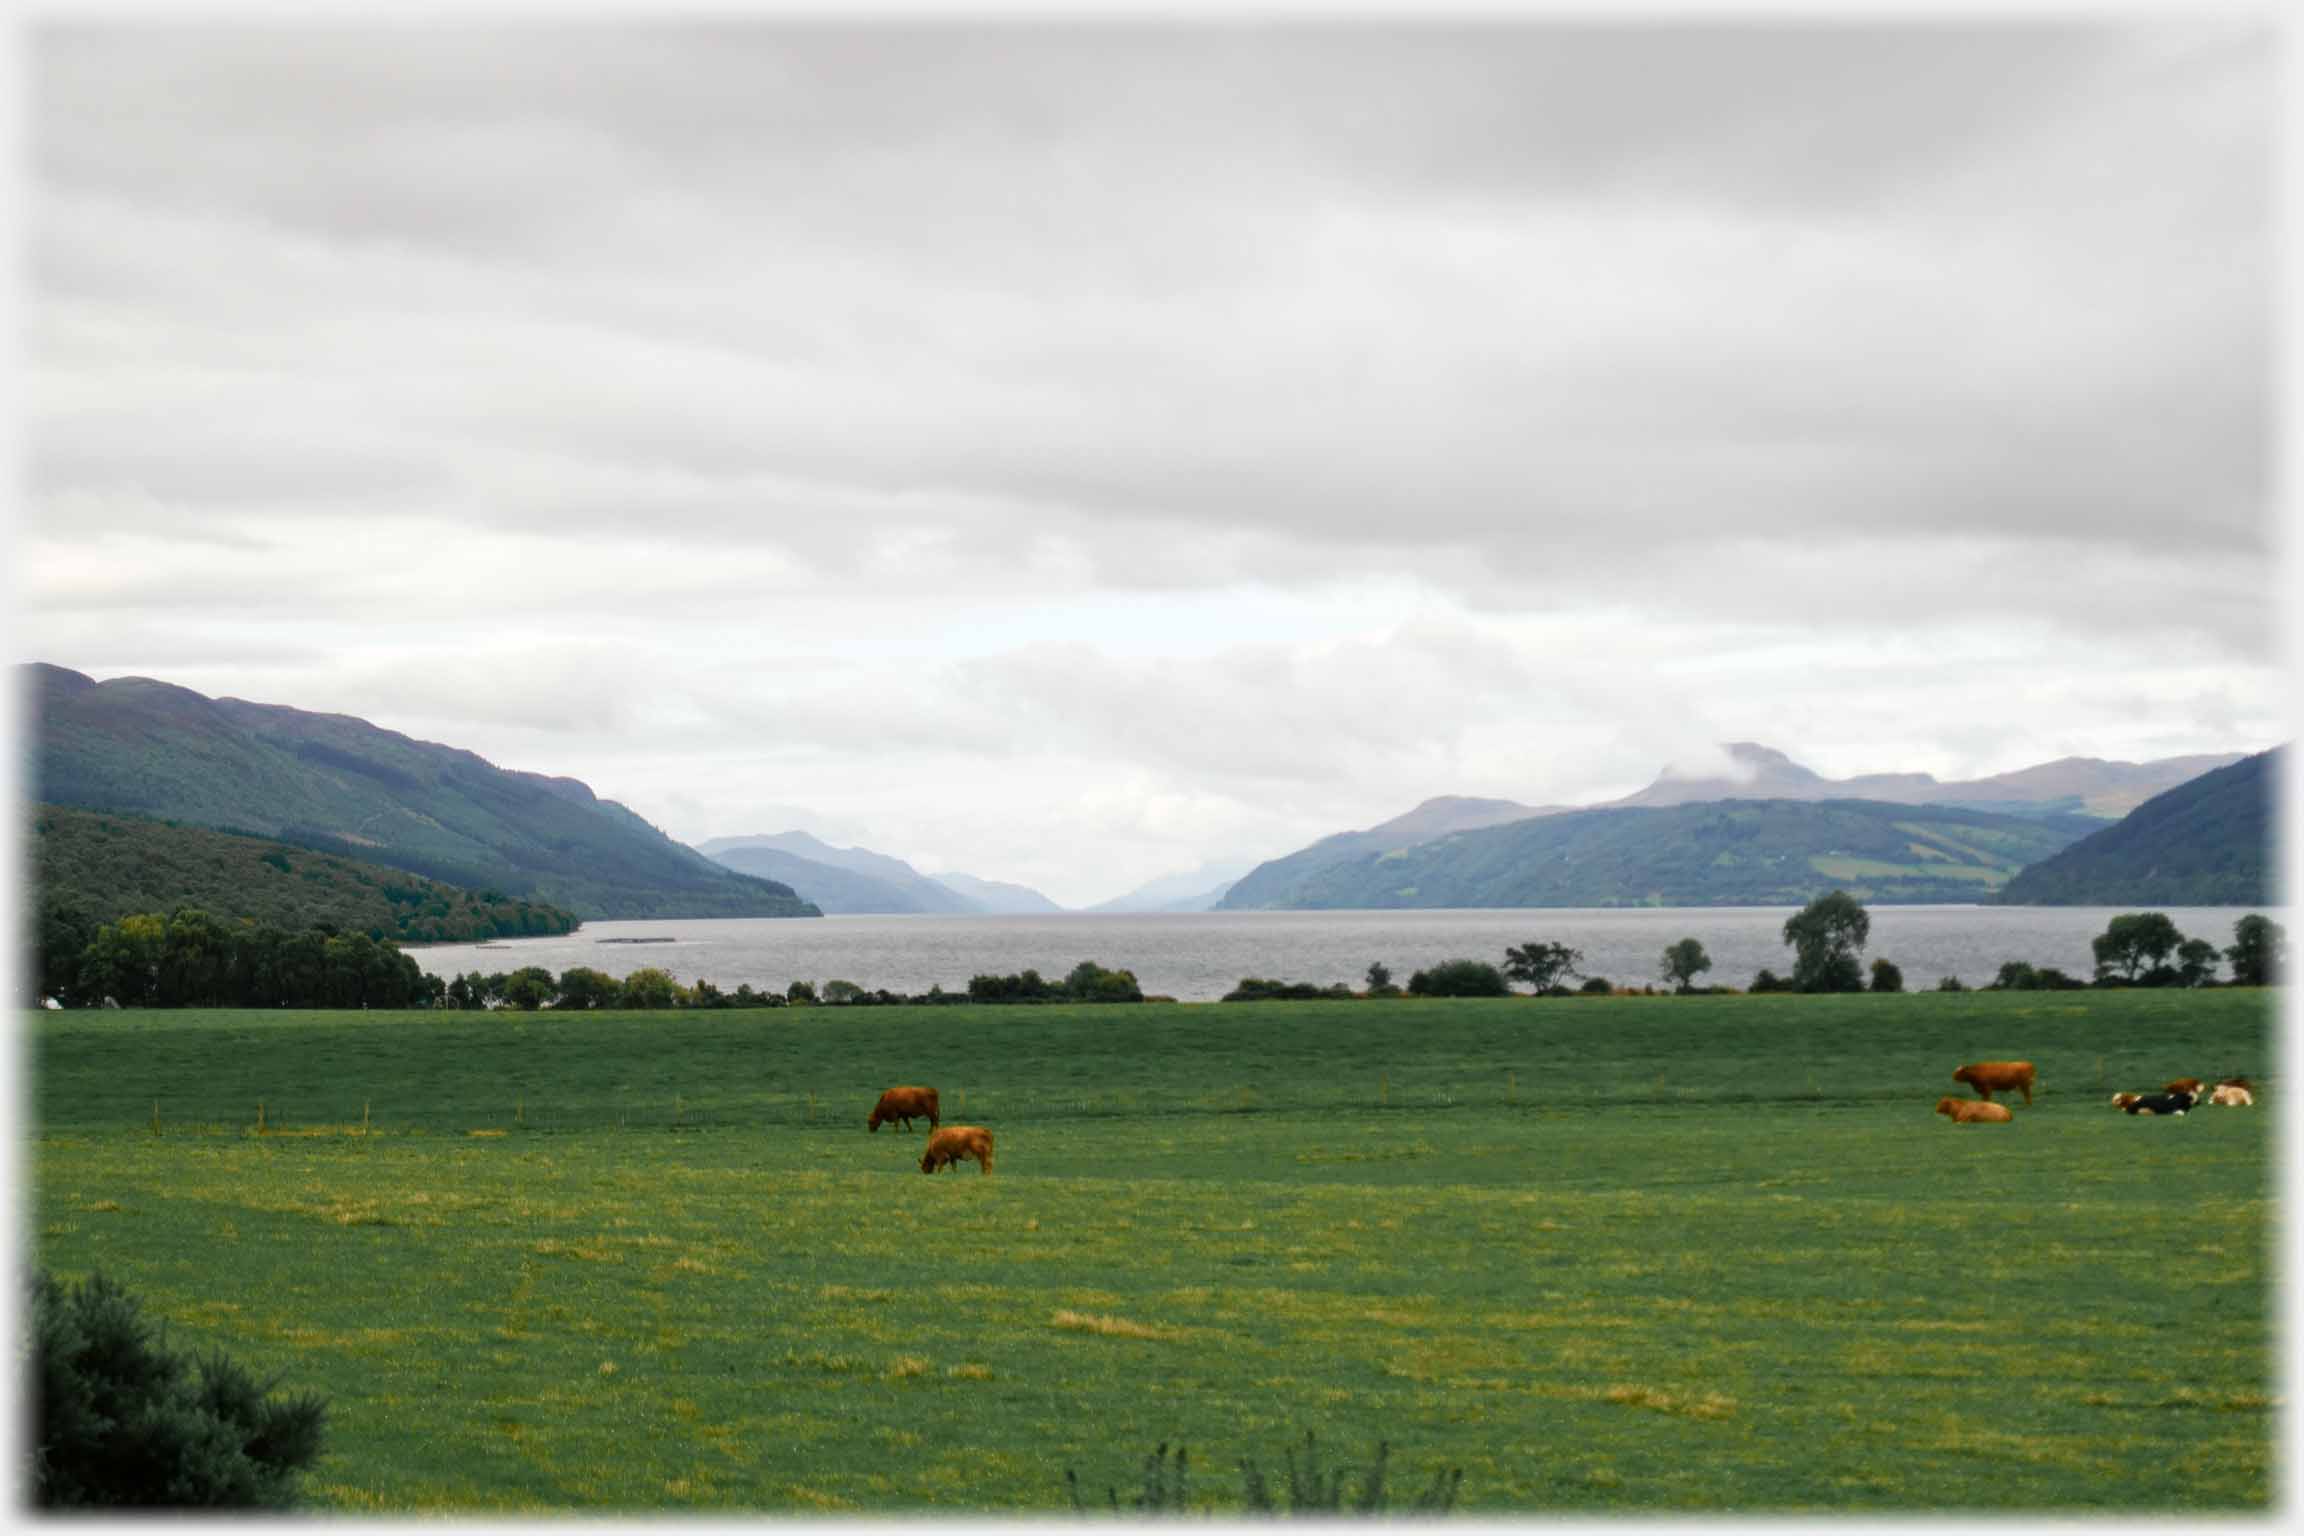 Loch going away into distance, field with cattle in foreground.